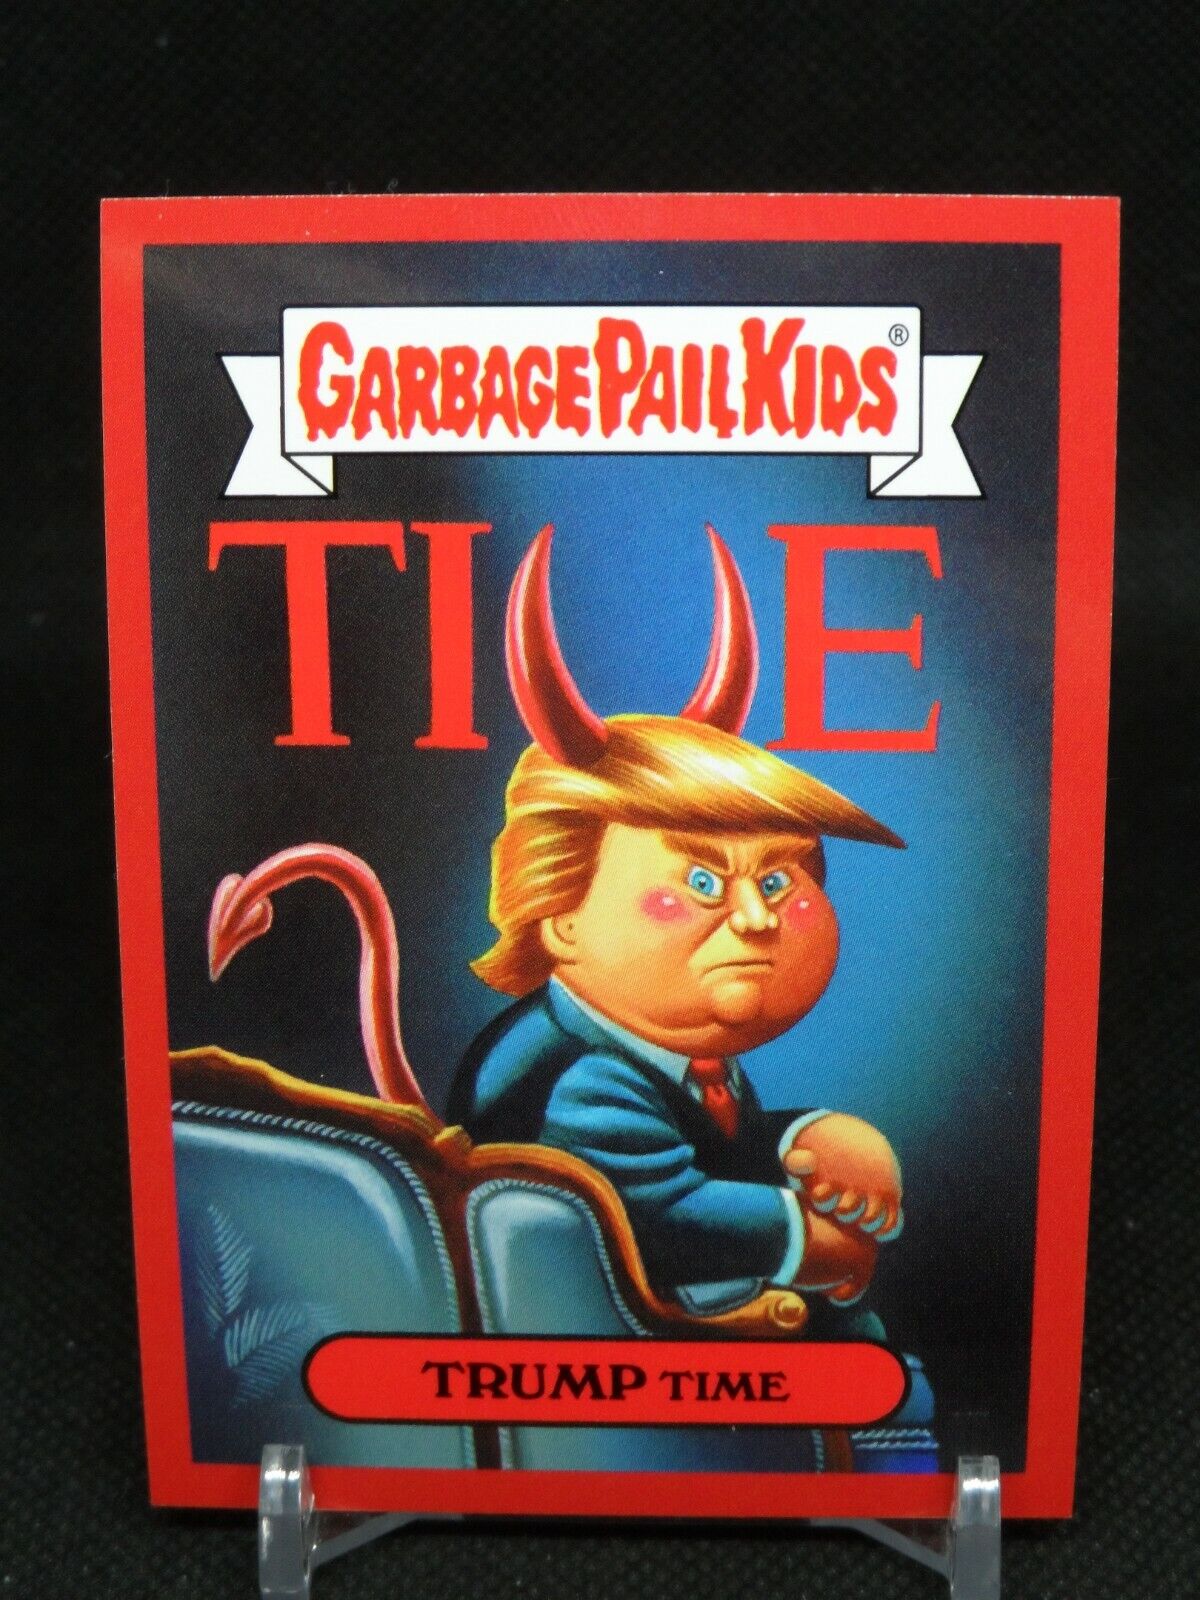 Devil 666 Donald Trump Time Disg-Race to the White House 2016 Garbage Pail Kids